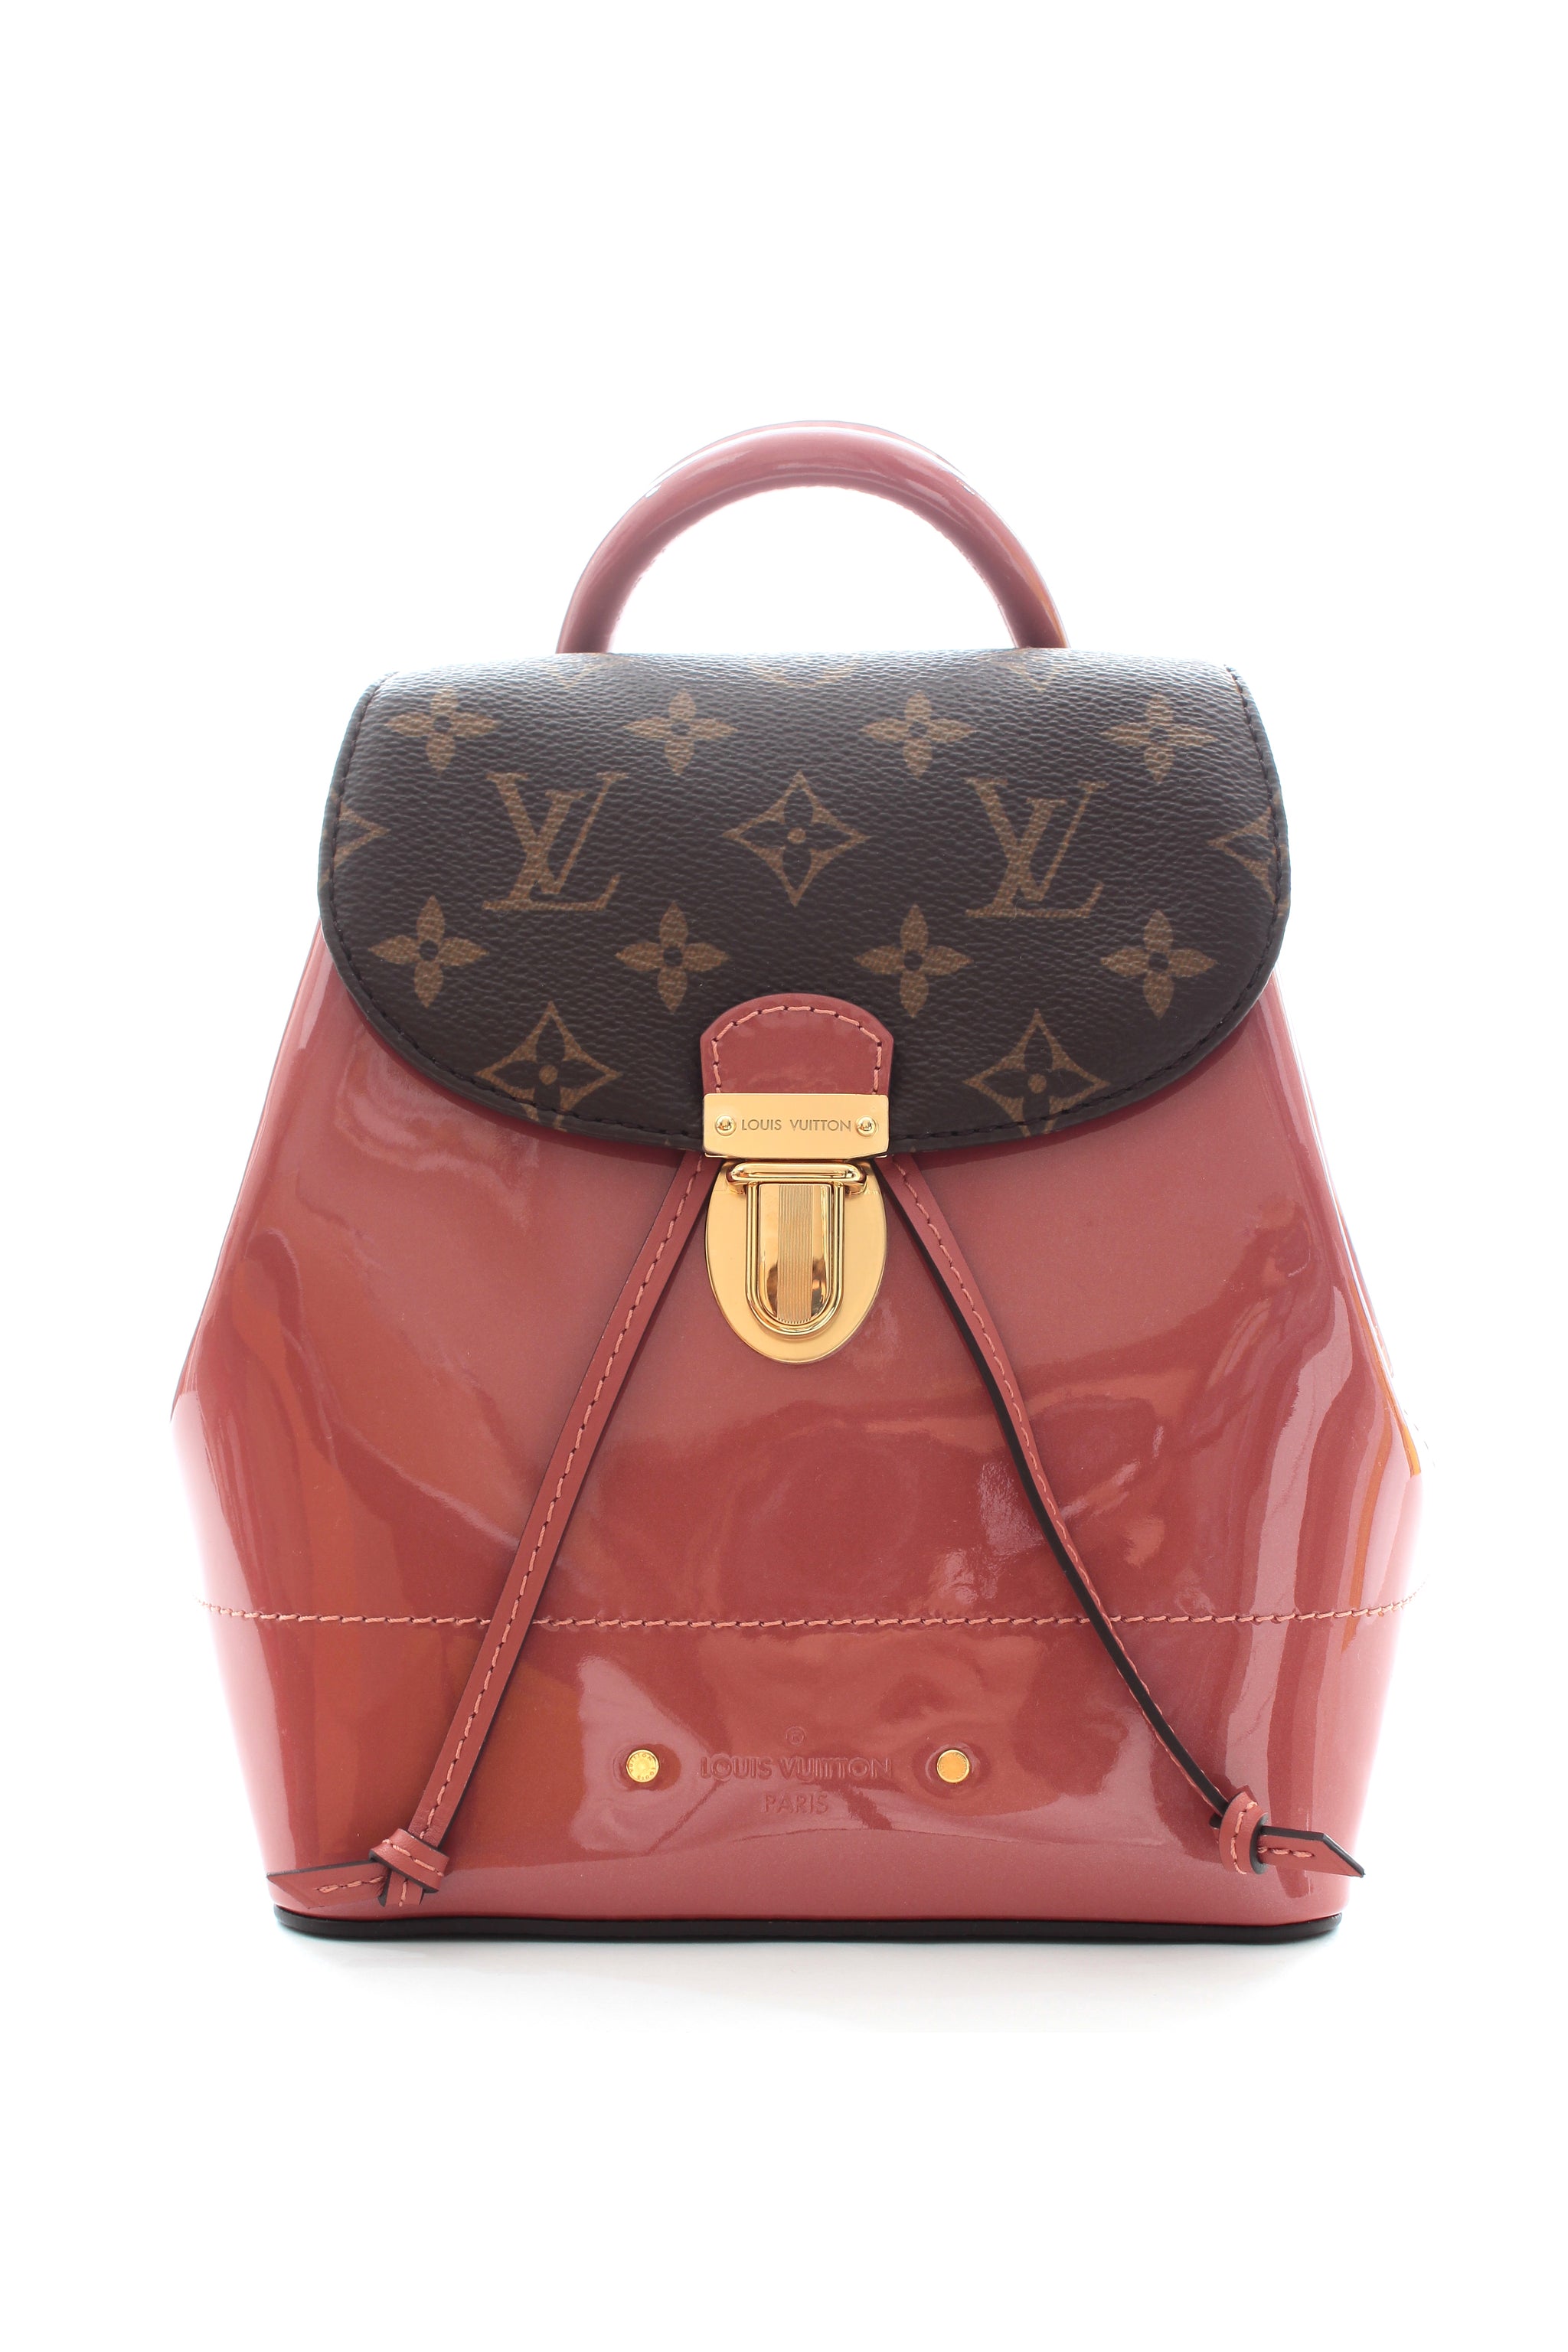 Louis Vuitton Hot Springs Patent Vernis and Monogram Canvas Backpack -  Closet Upgrade